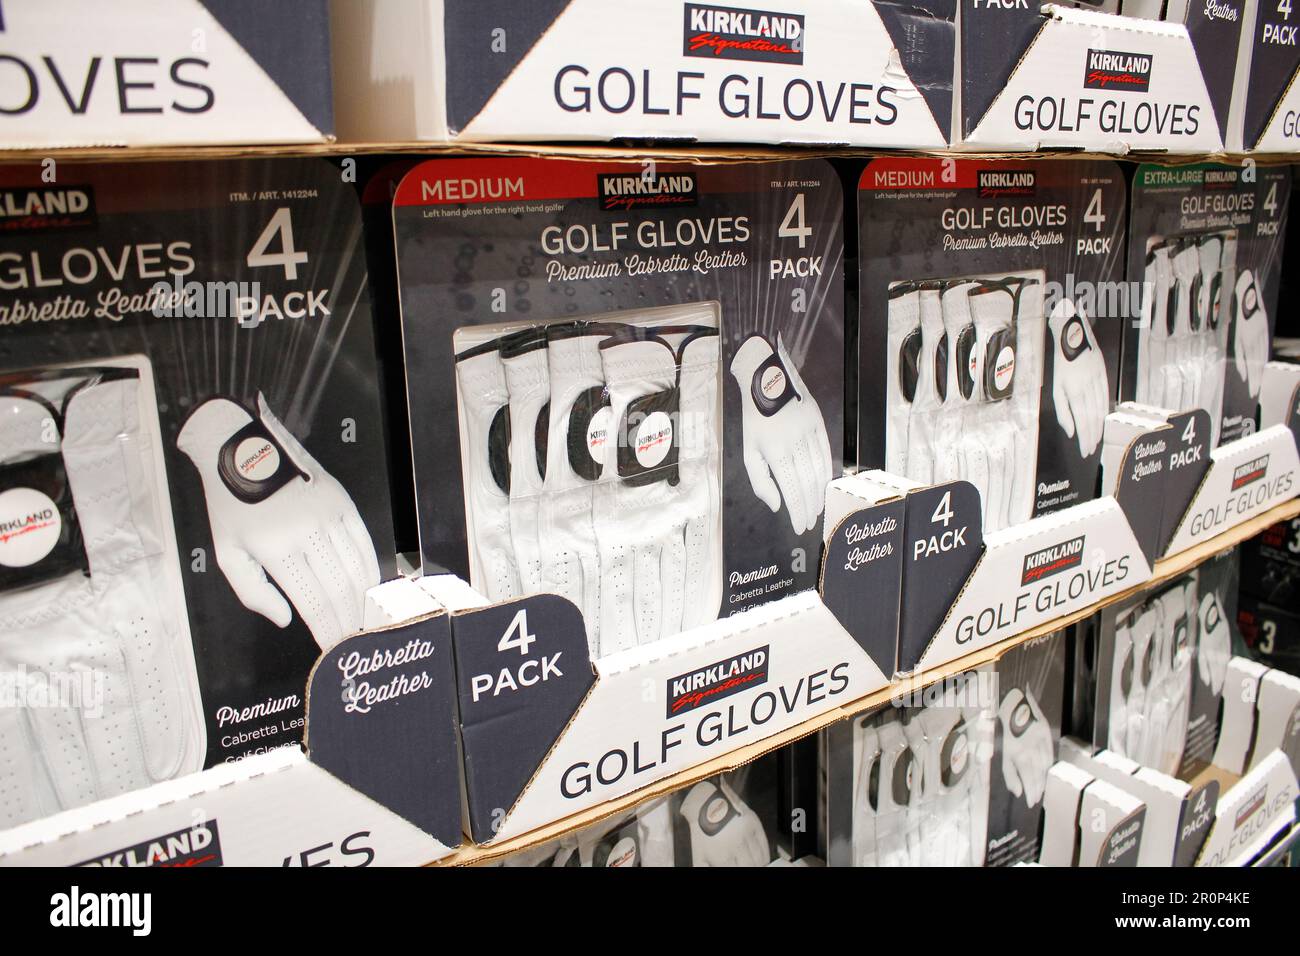 Los Angeles, California, United States - 10-25-2021: A view of several packages of Kirkland Signature golf gloves, on display at a local Costco store. Stock Photo